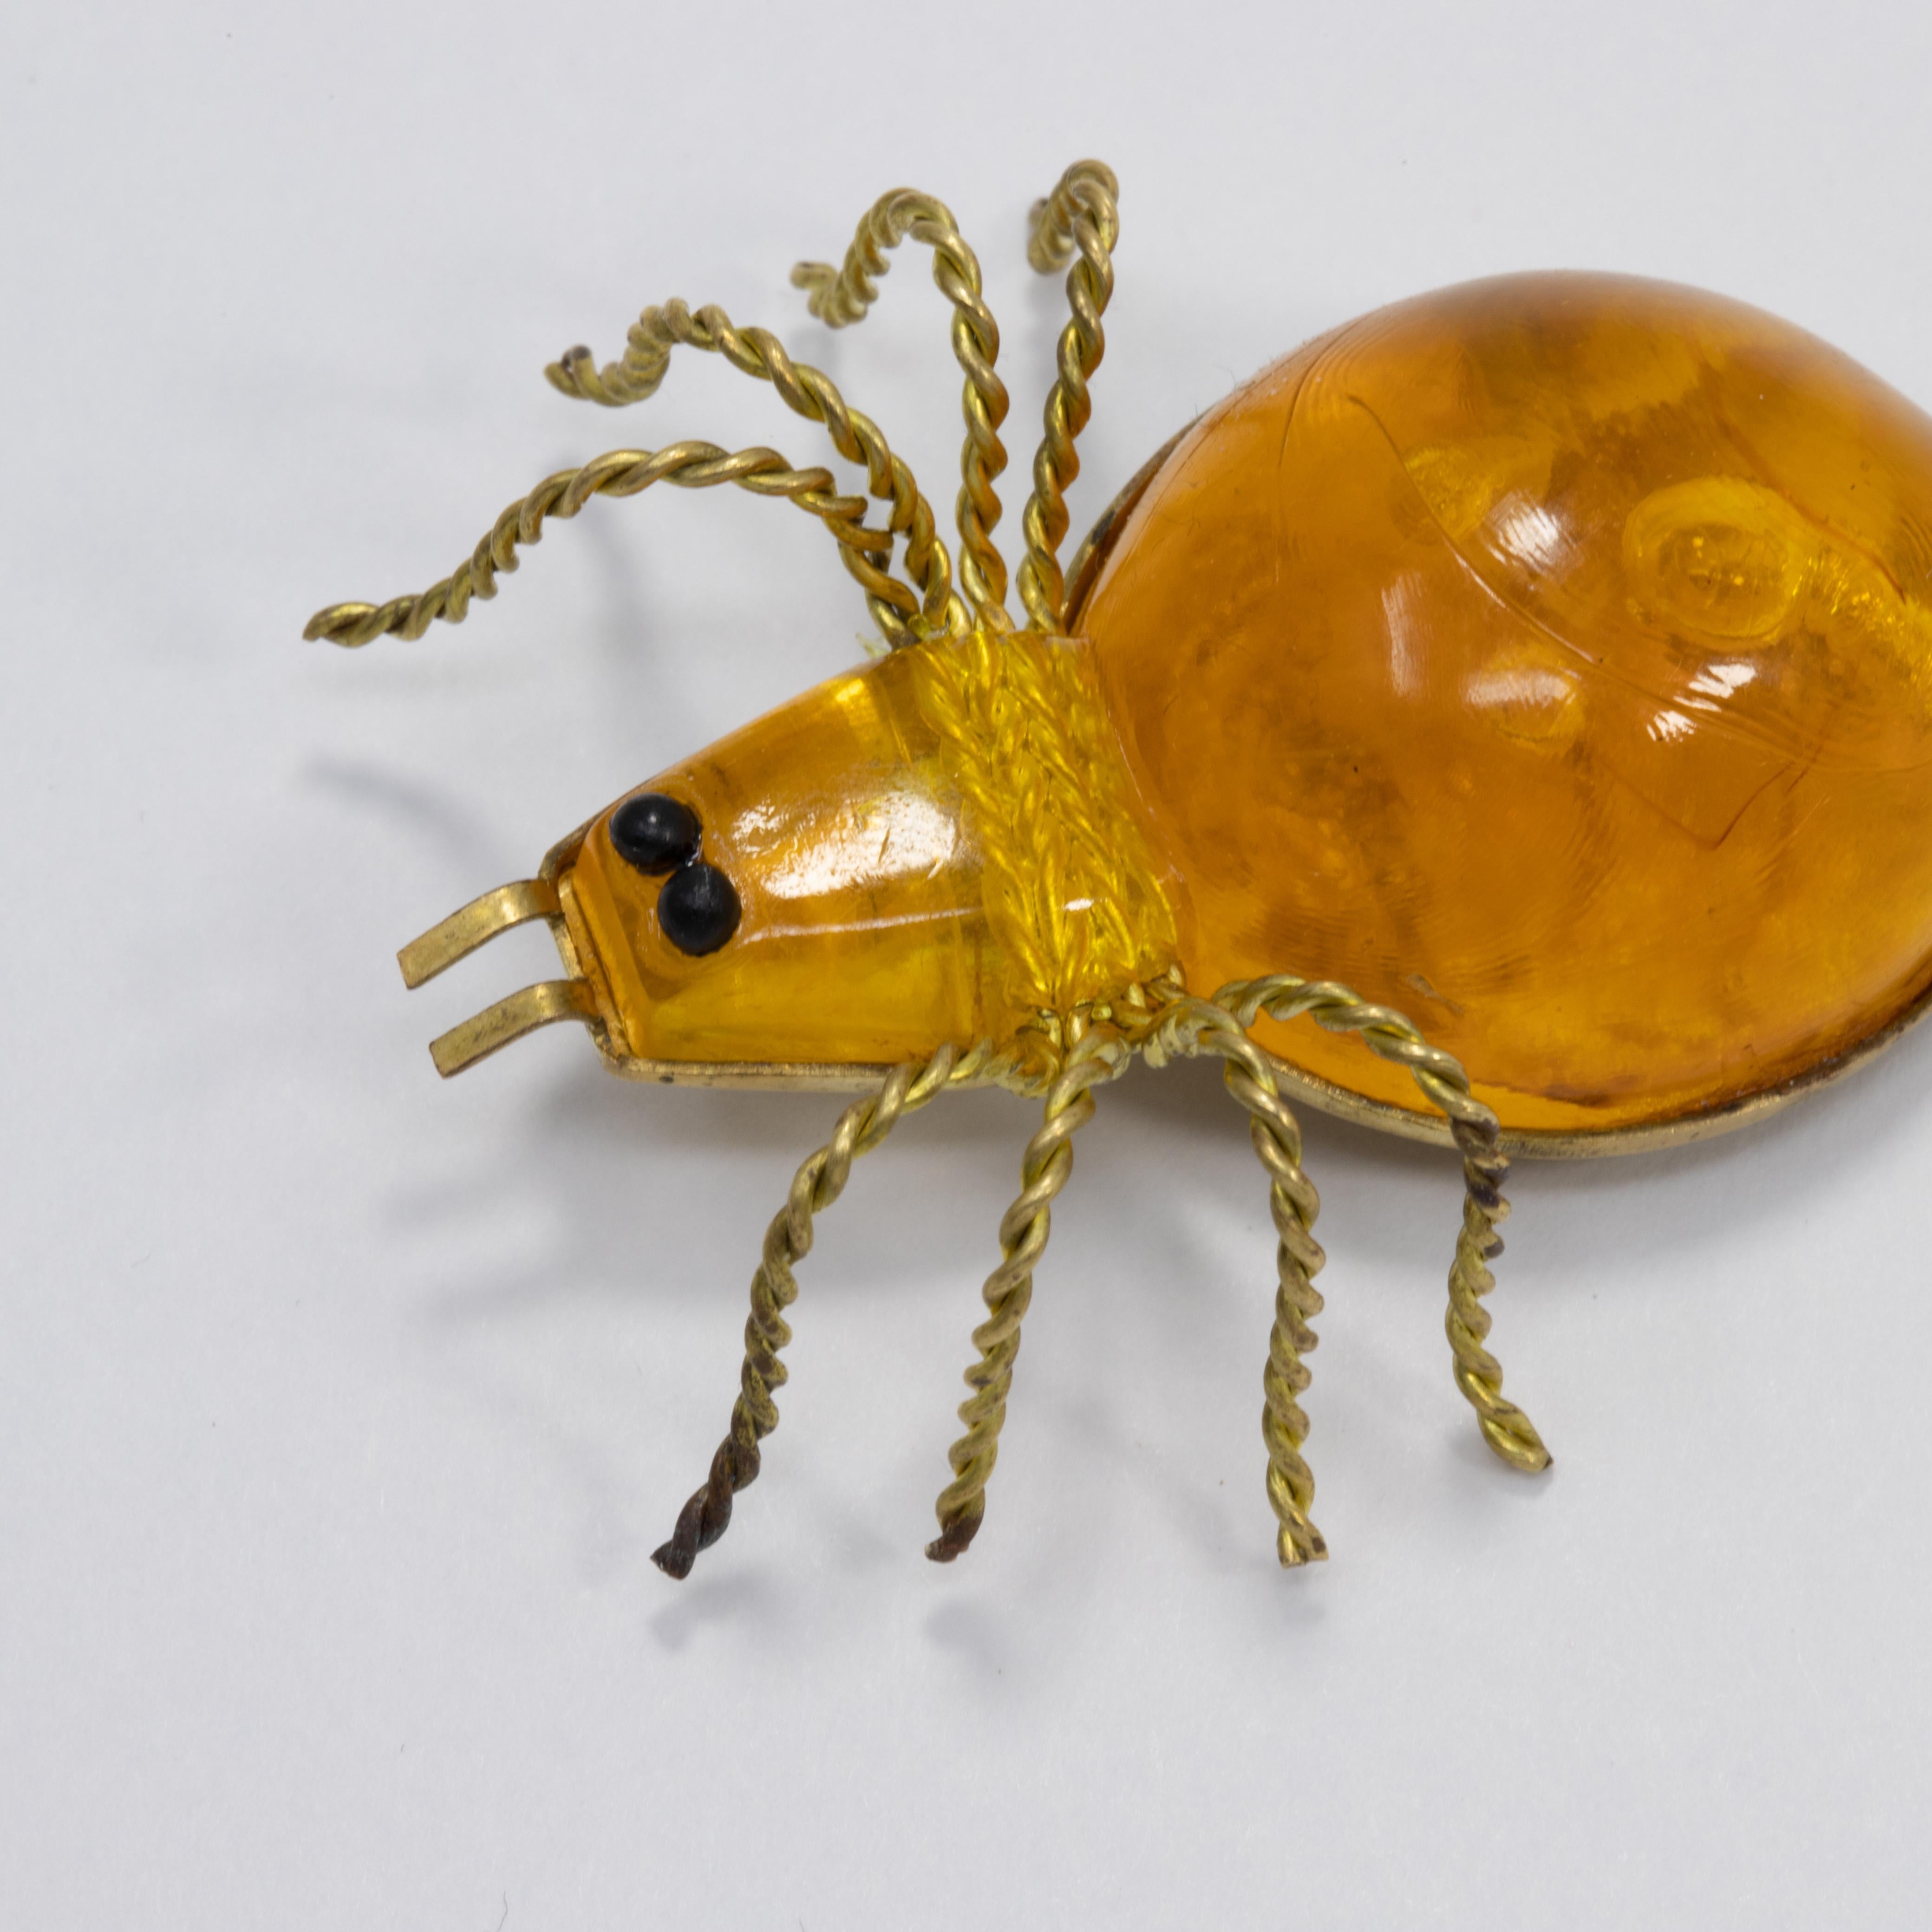 20c BALTIC AMBER RUSSIA SOVIET INSECT SPIDER BROOCH GOLD JEWELRY 老琥珀 PIN ORDER 